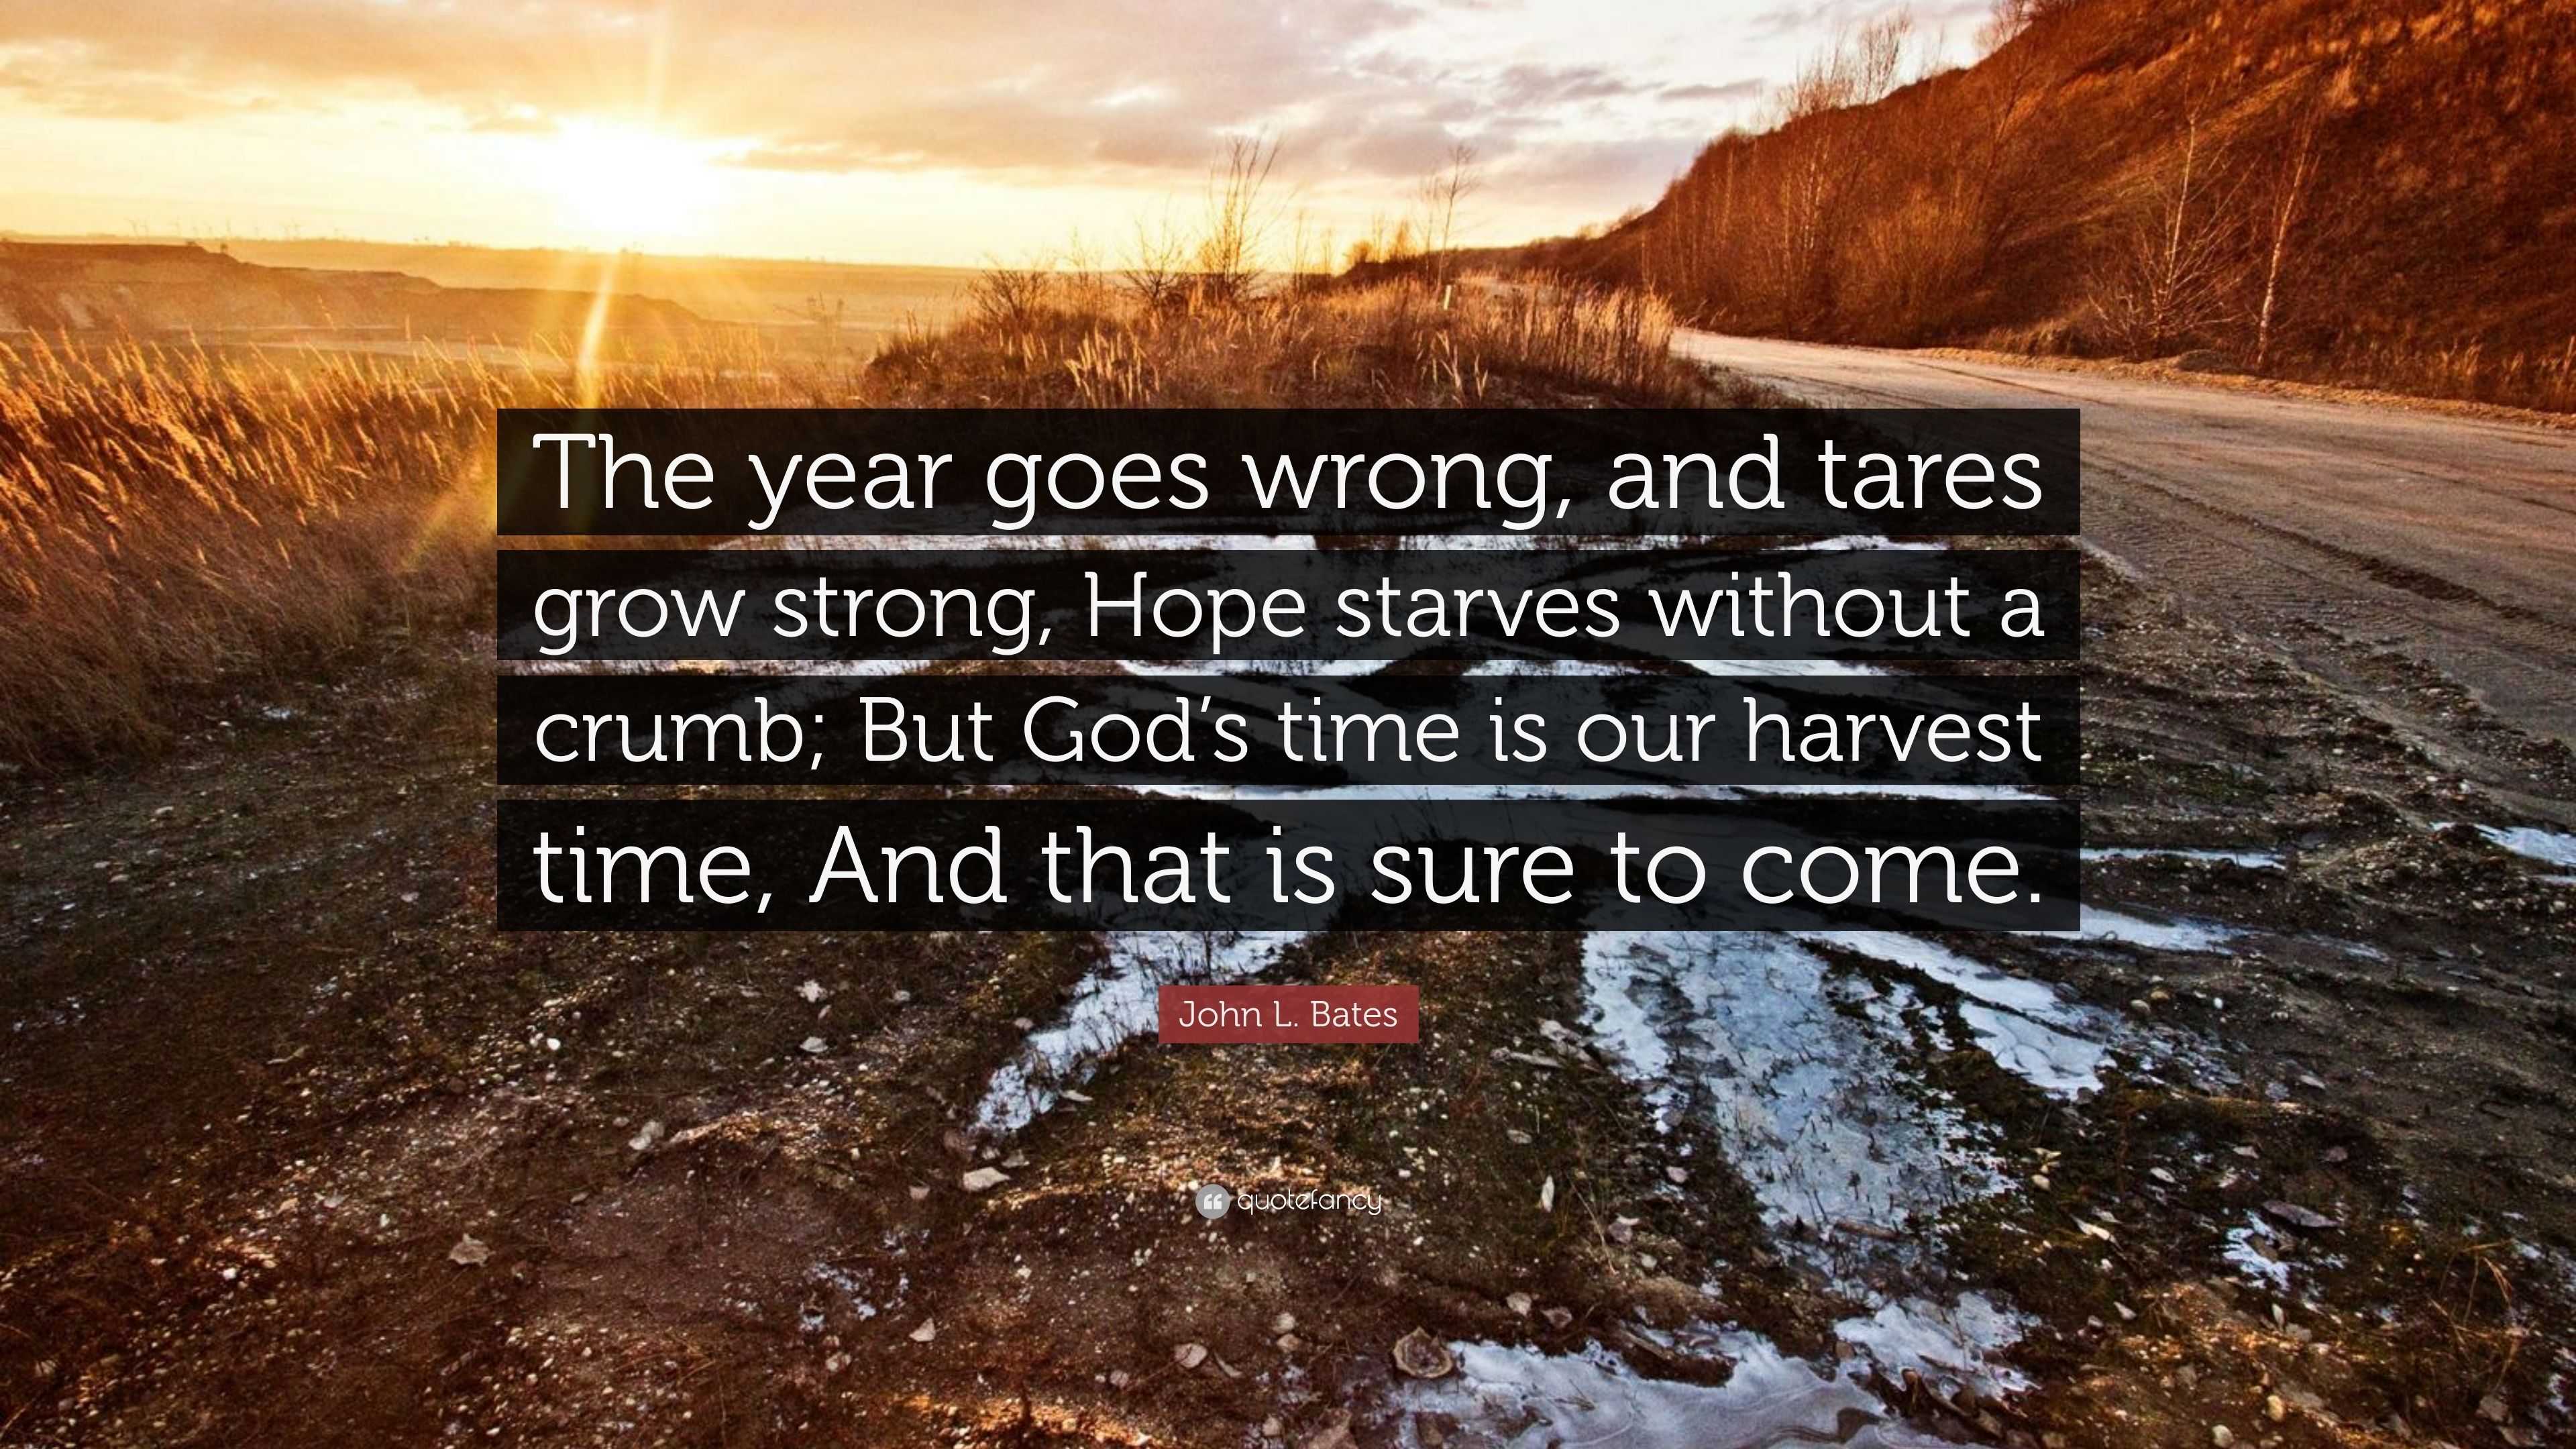 John L. Bates Quote: “The year goes wrong, and tares grow strong